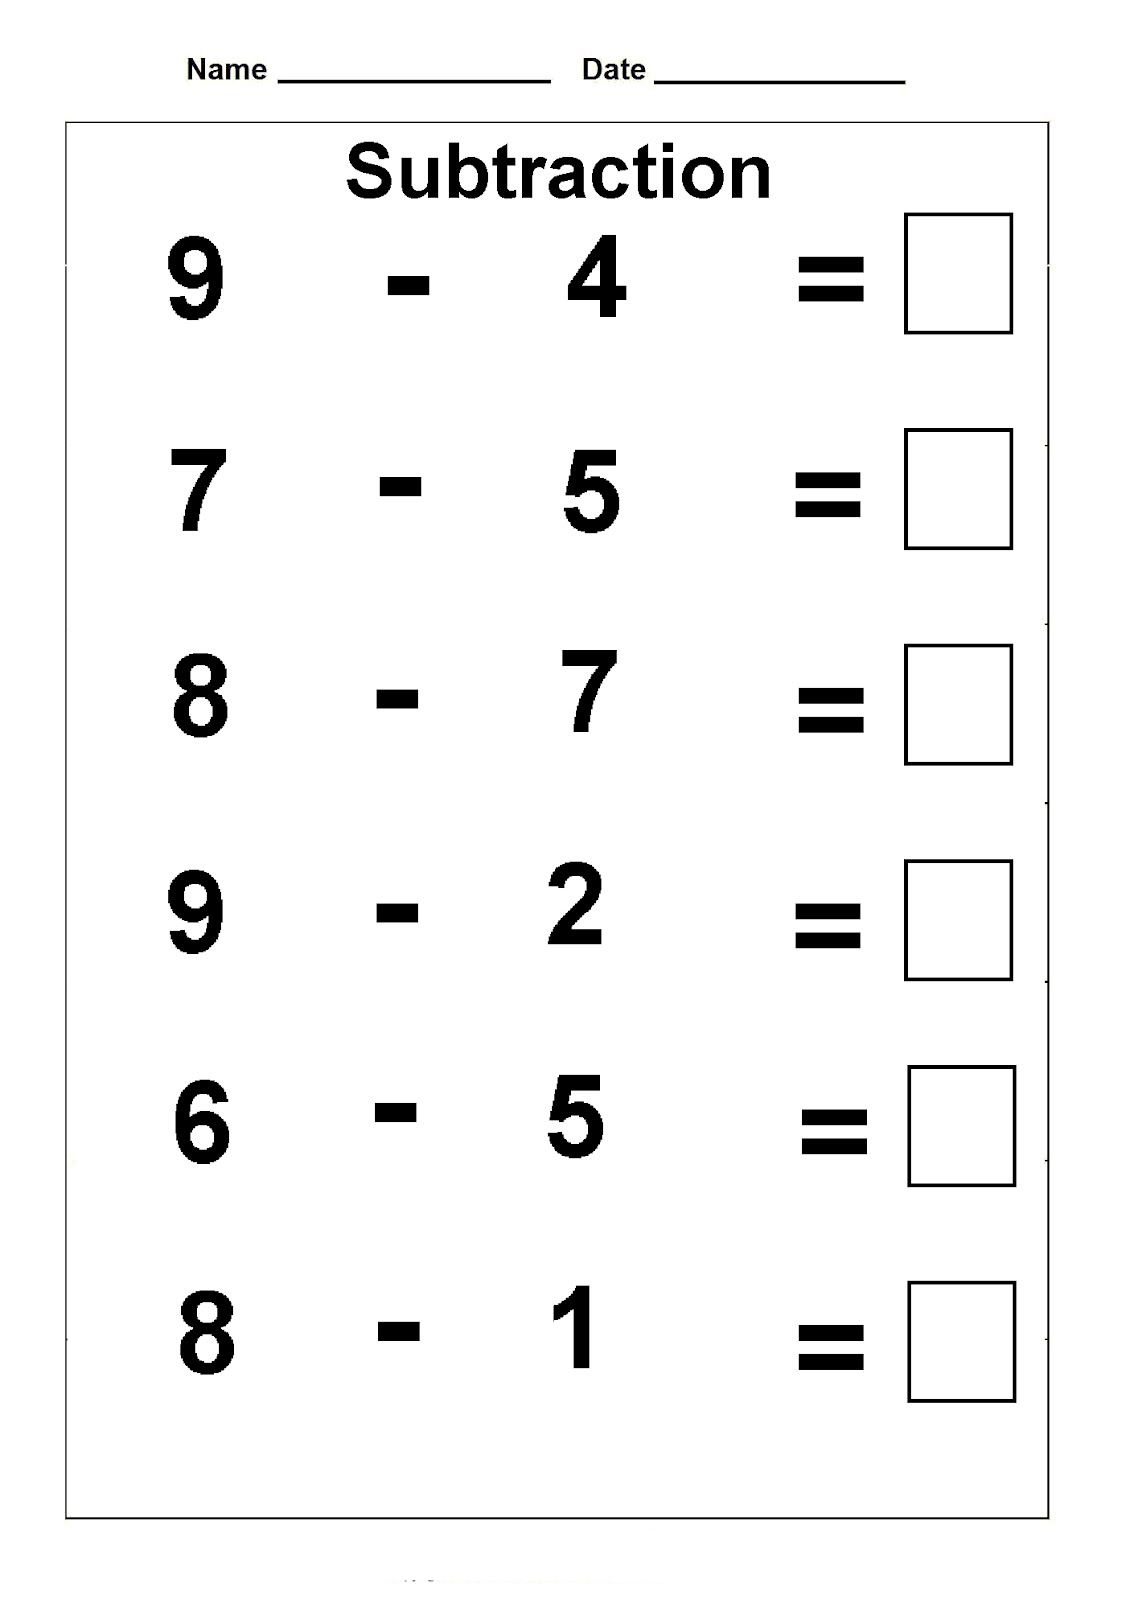 39 Simple First Grade Math Worksheets For You Https baca